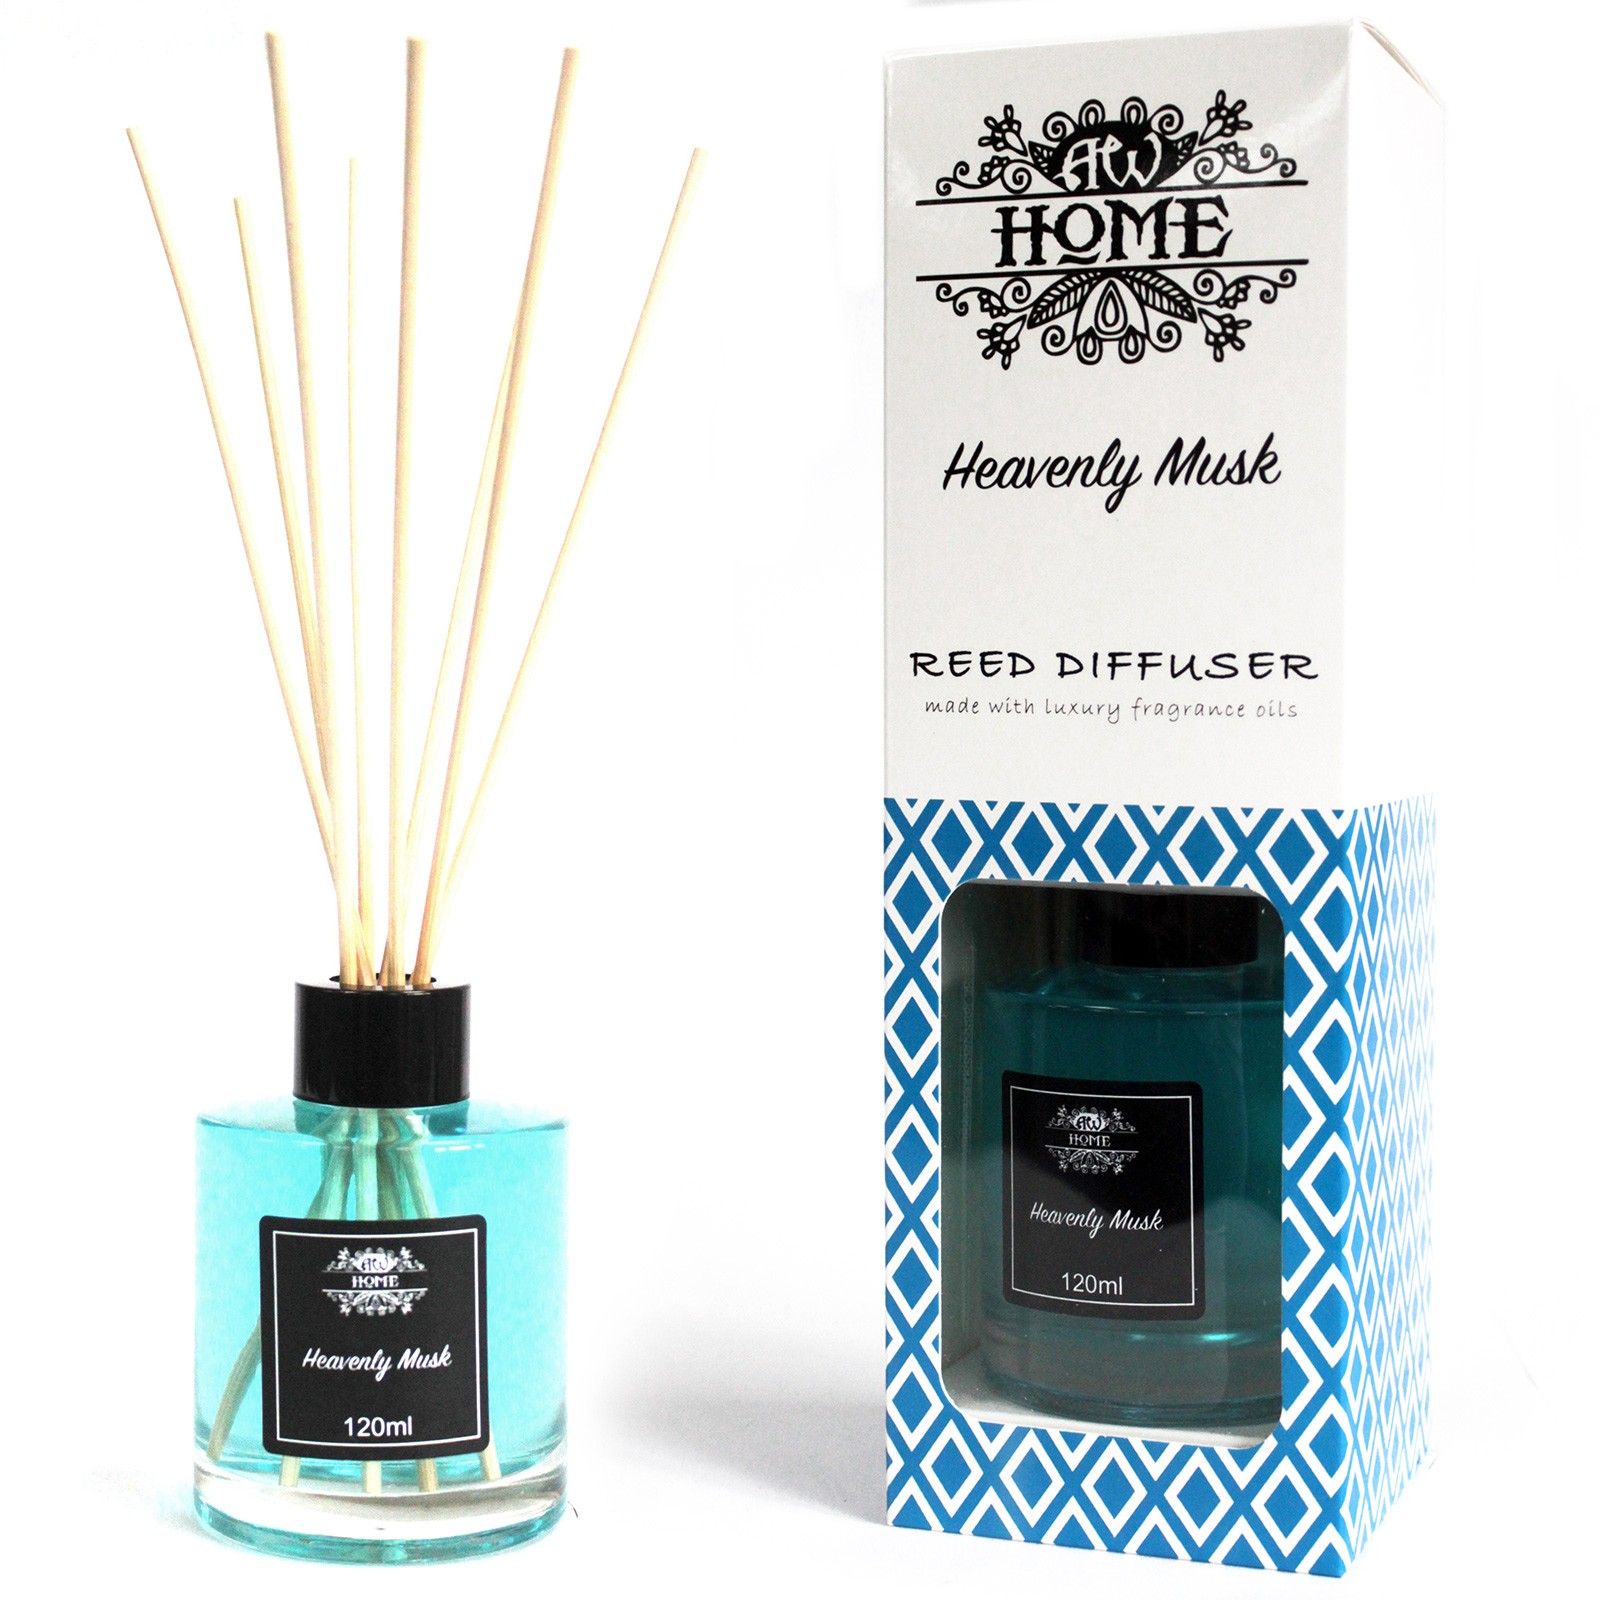 Heavenly Musk - Home Fragrance Reed Diffuser - 120ml With Reeds